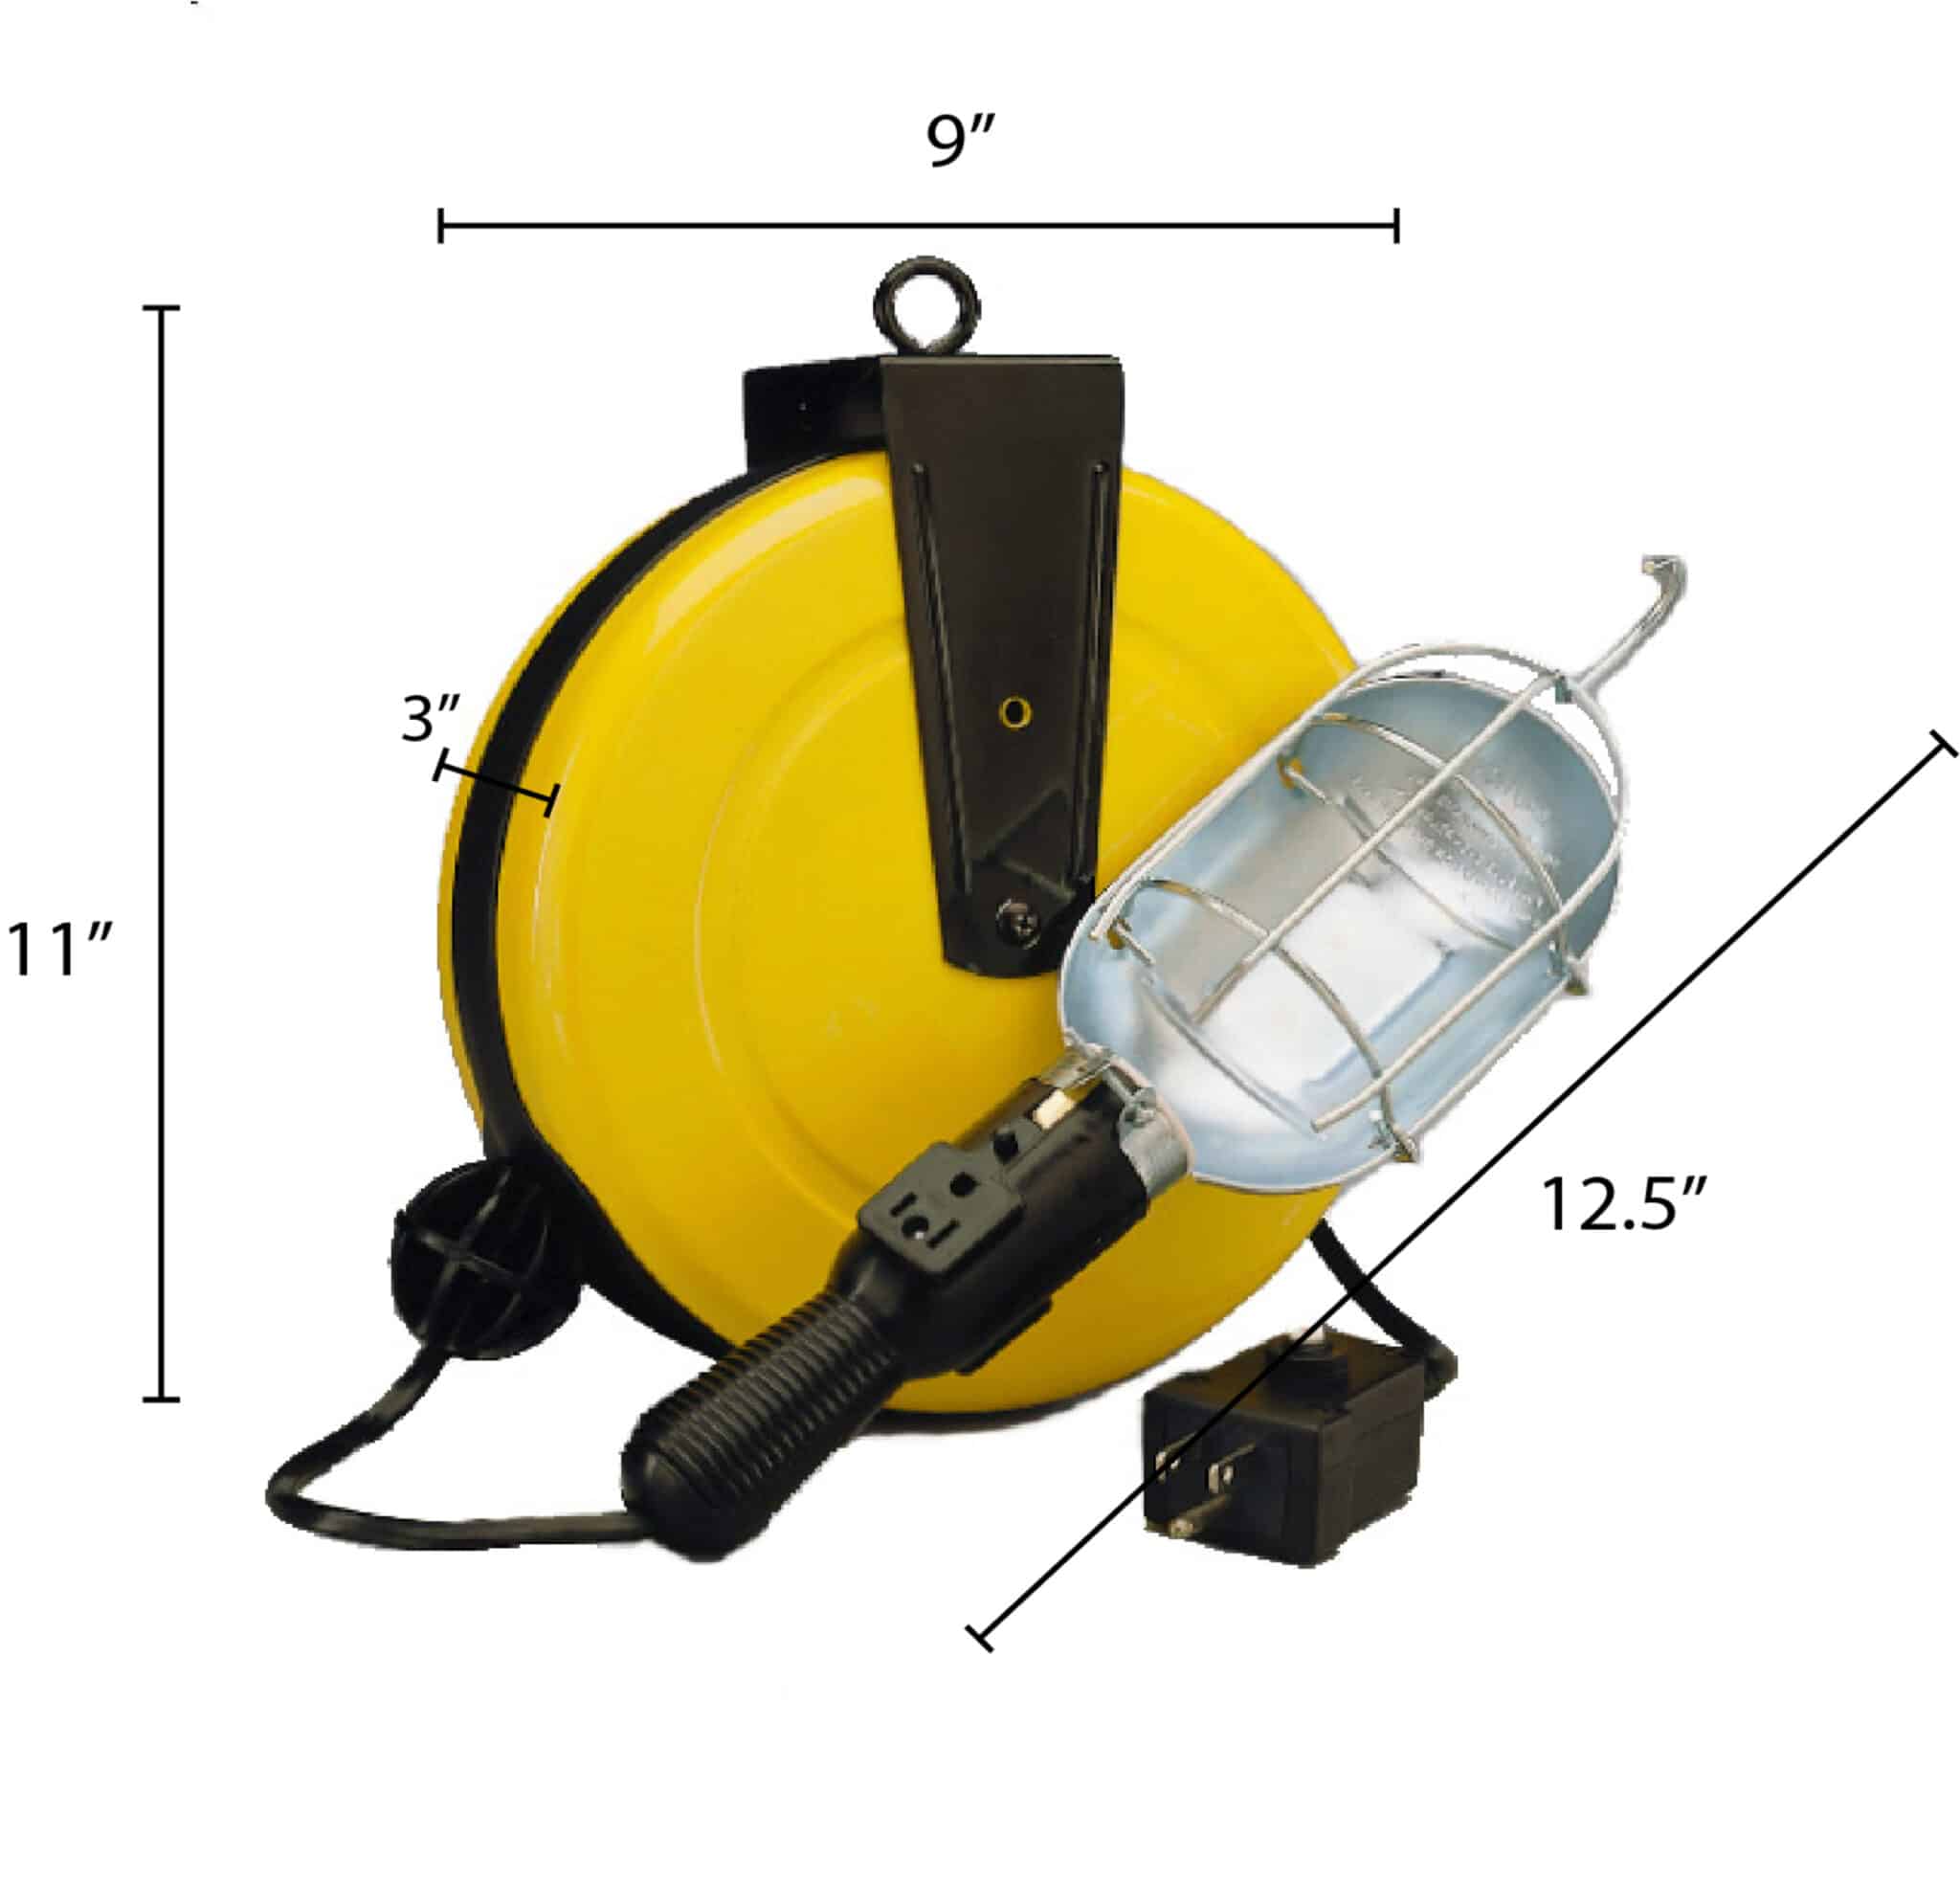 https://alertreels.com/wp-content/uploads/5000-50G-CB-professional-grade-retractable-cord-reel-with-incandescent-work-light-50-feet-with-circuit-breaker-proreel-dimensions_2560x2456.jpg